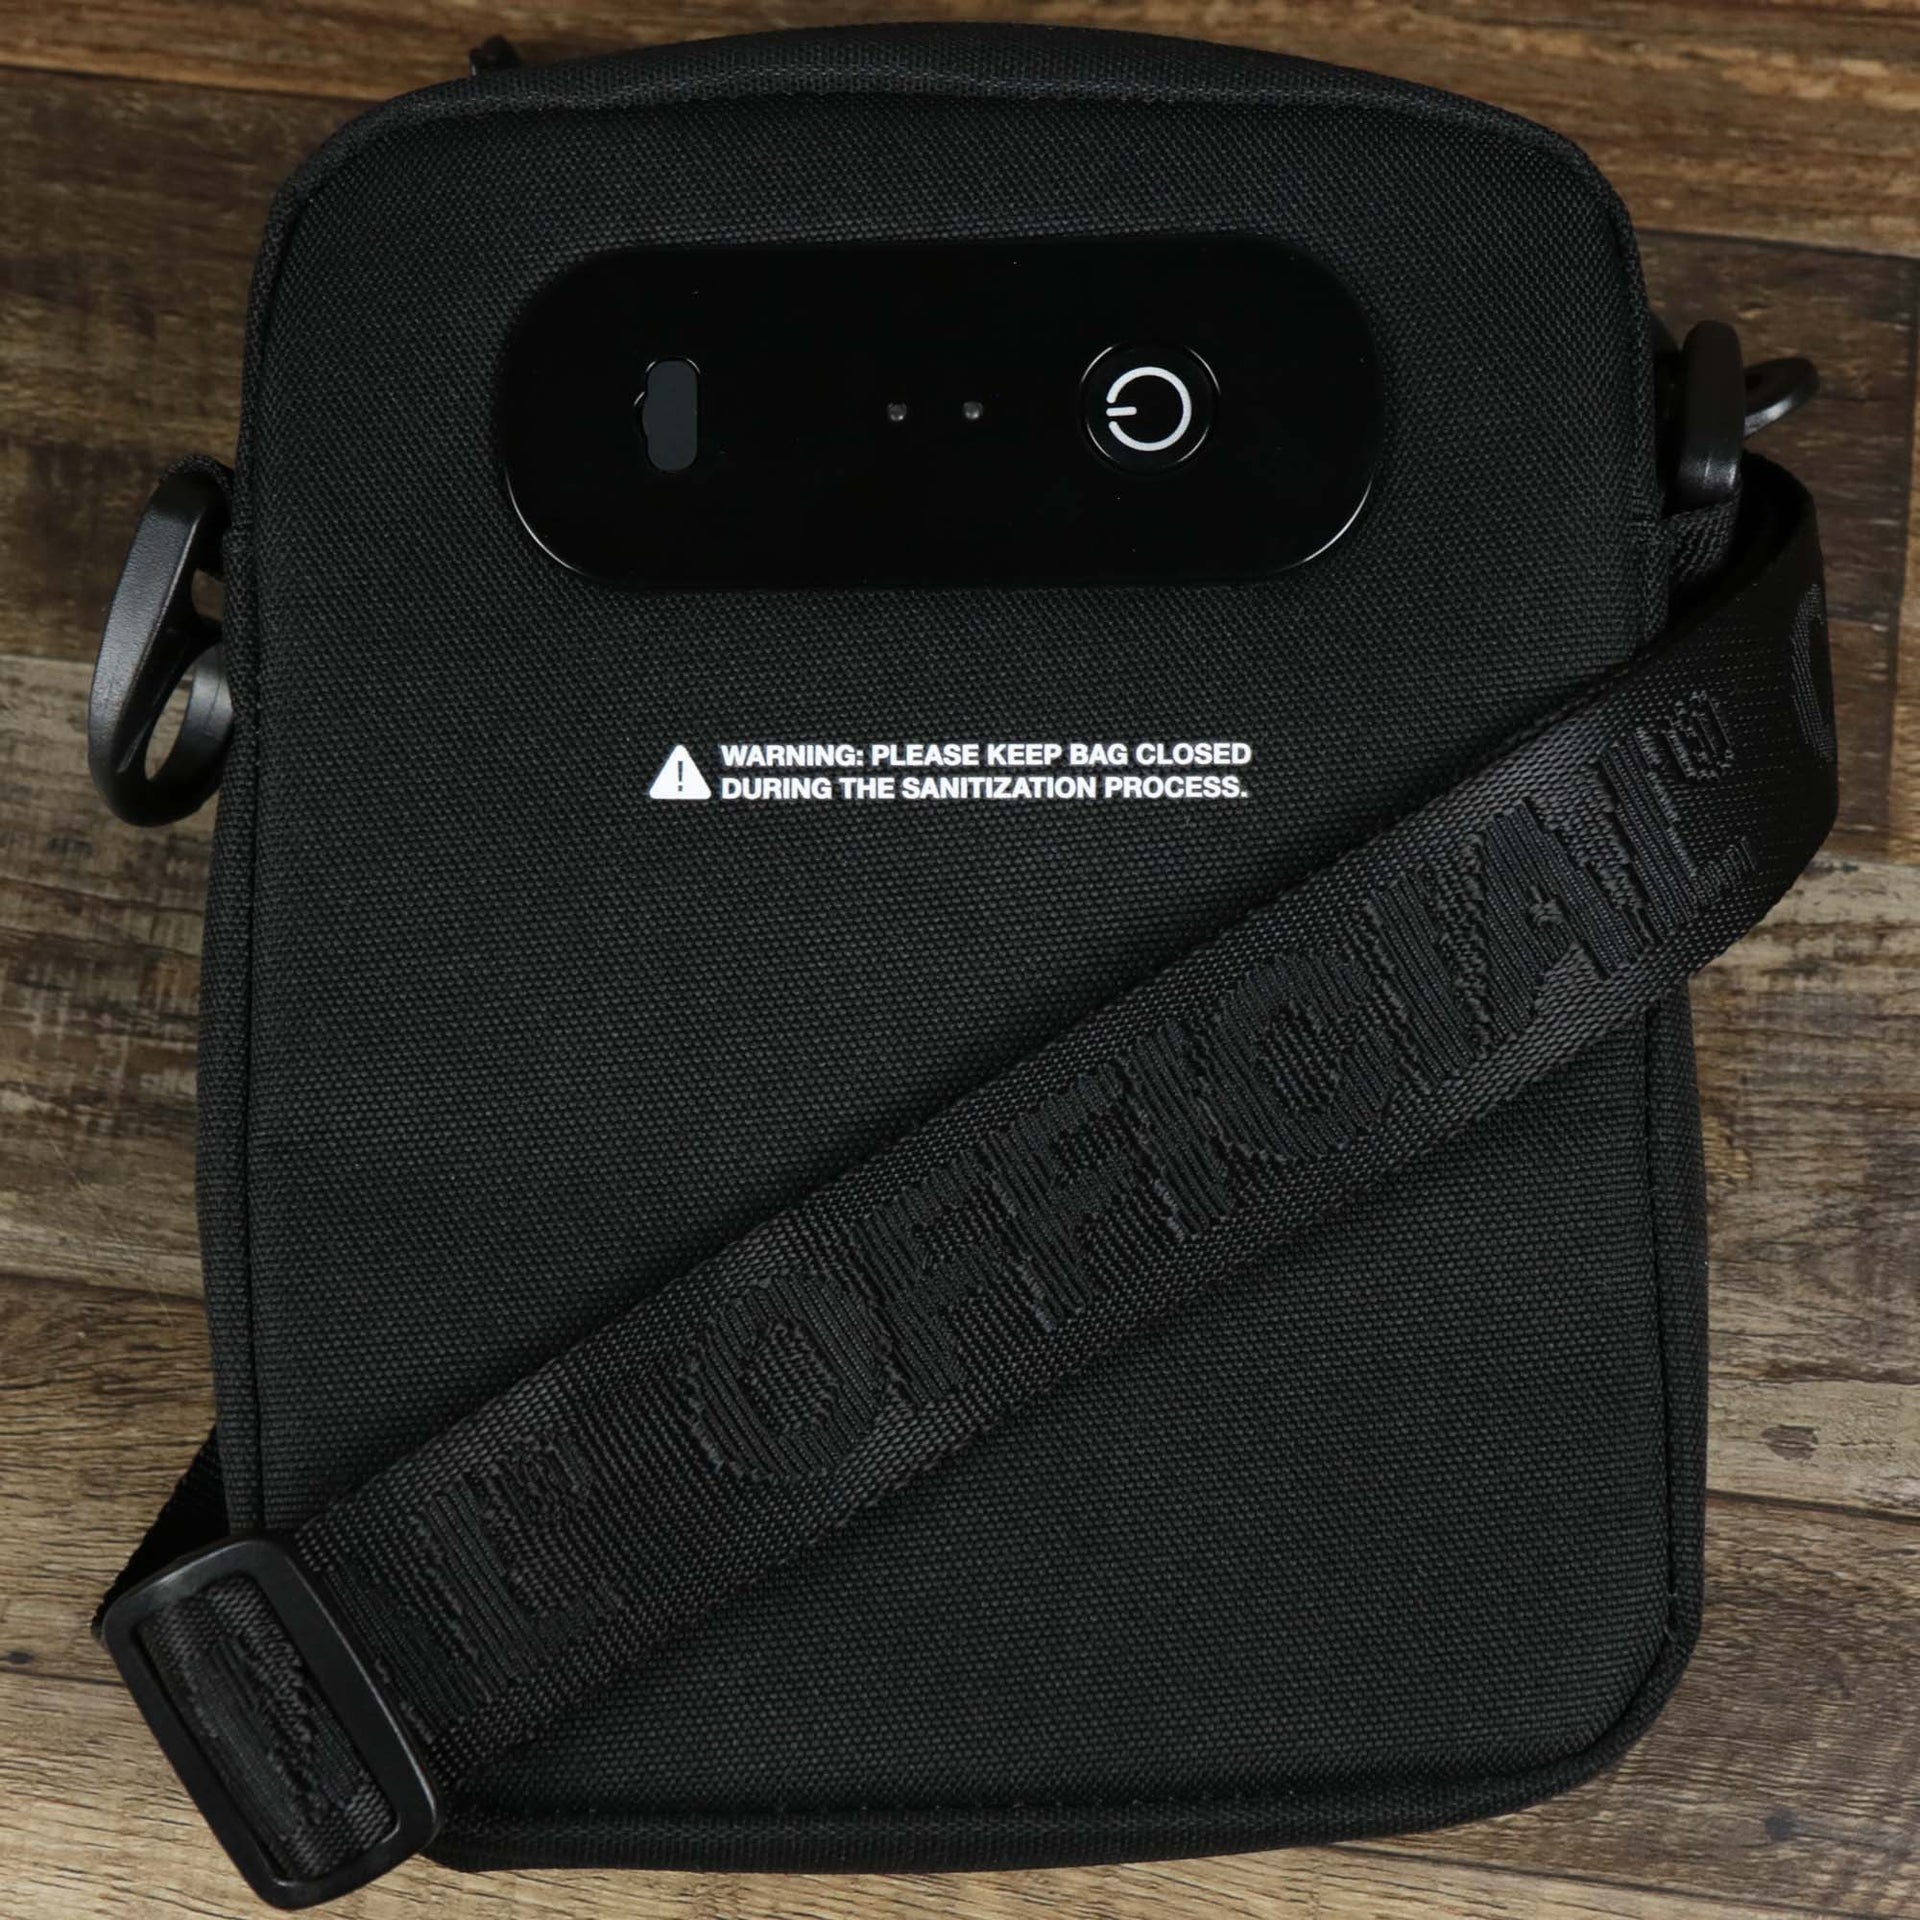 The backsides of the UVC Sterilization Shoulder Bag Streetwear | Official Black with the official strap